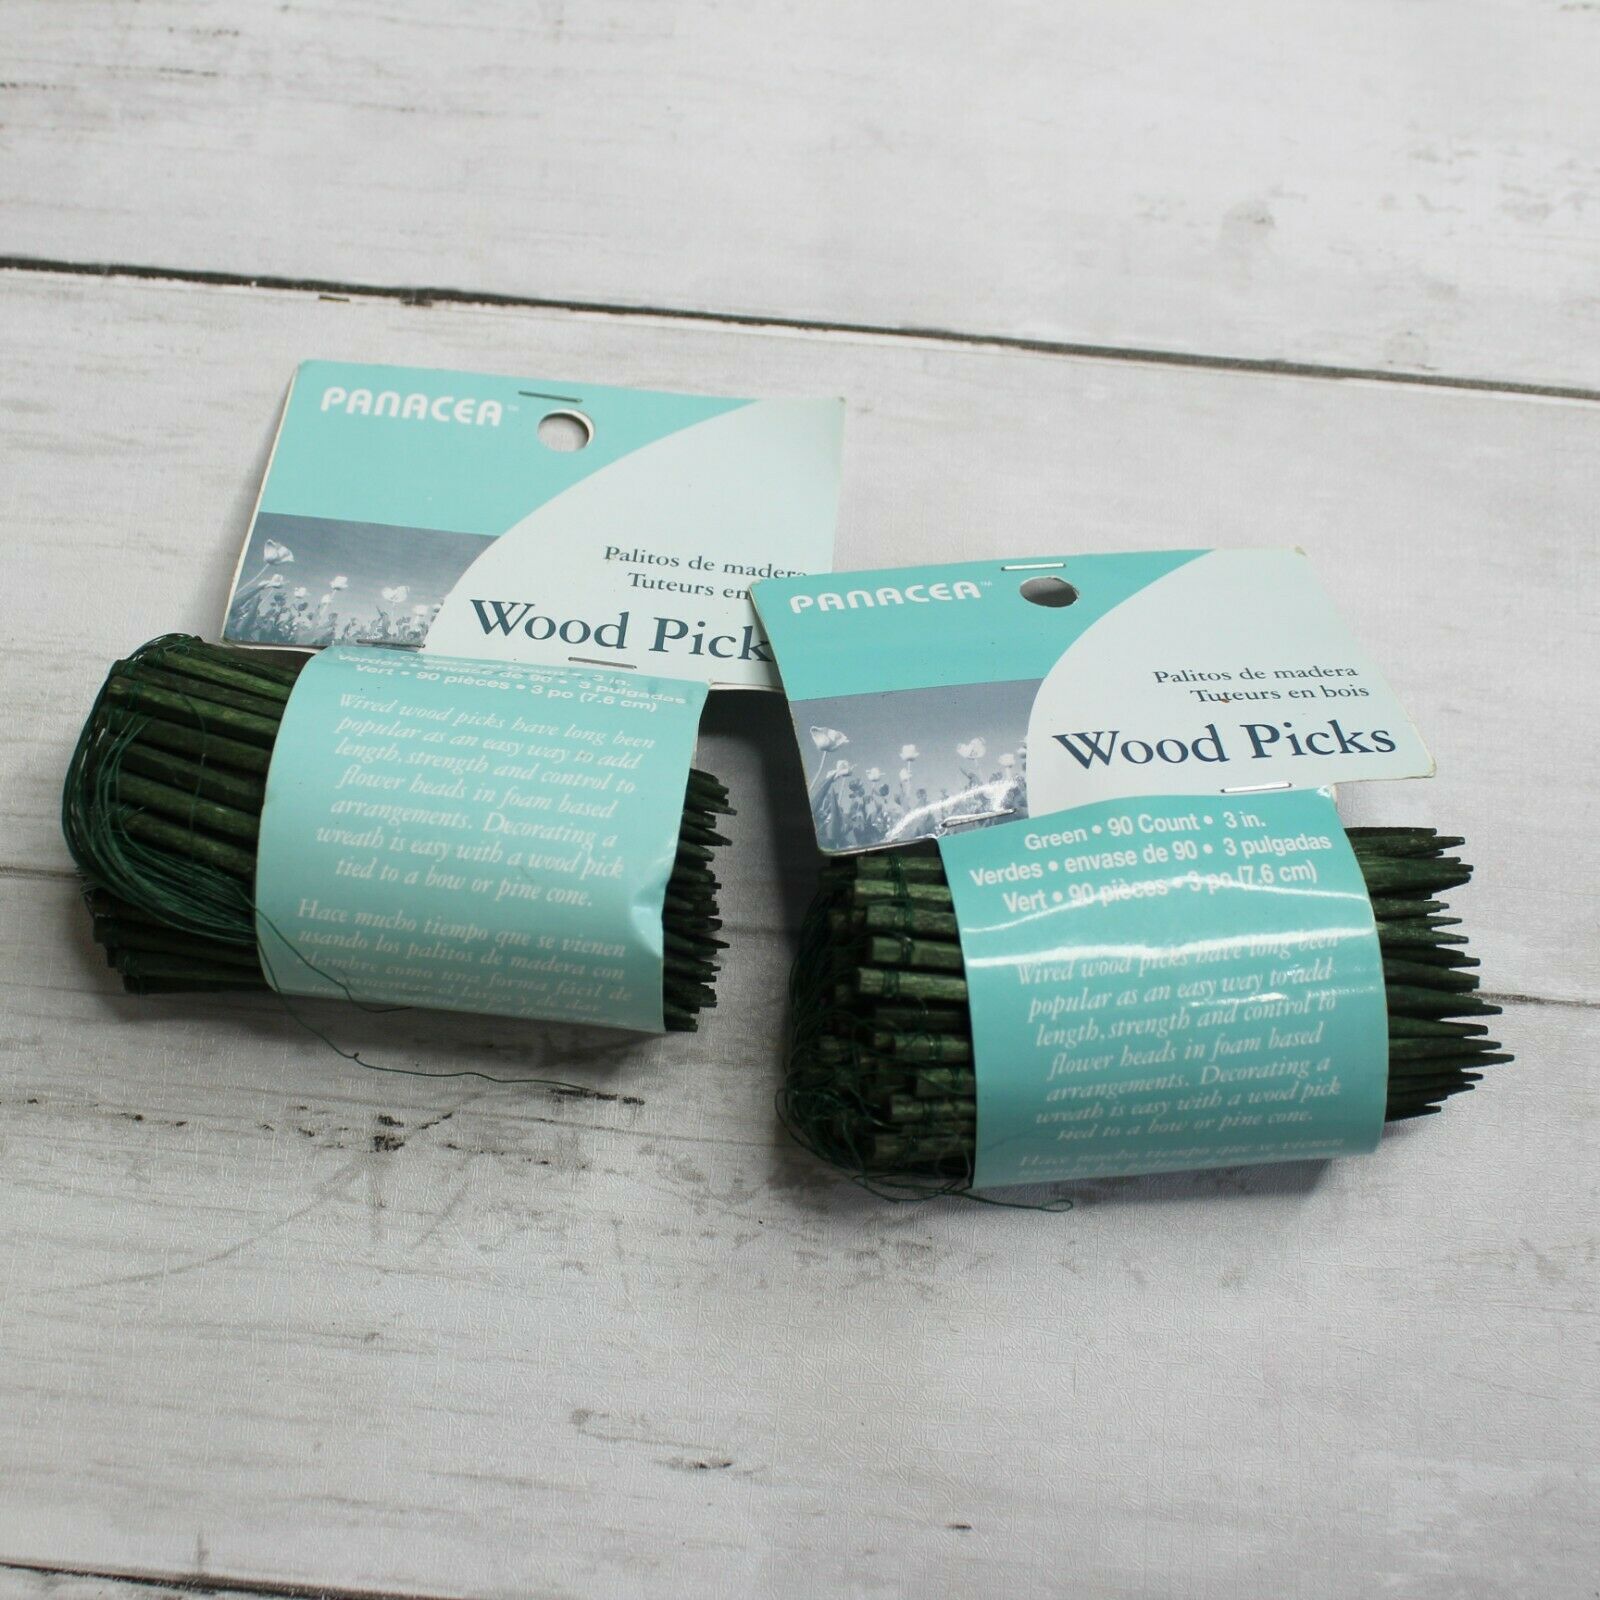 Panacea Wired Wood Floral Picks 90 Count 3" Green Wooden Florist Wire Lot